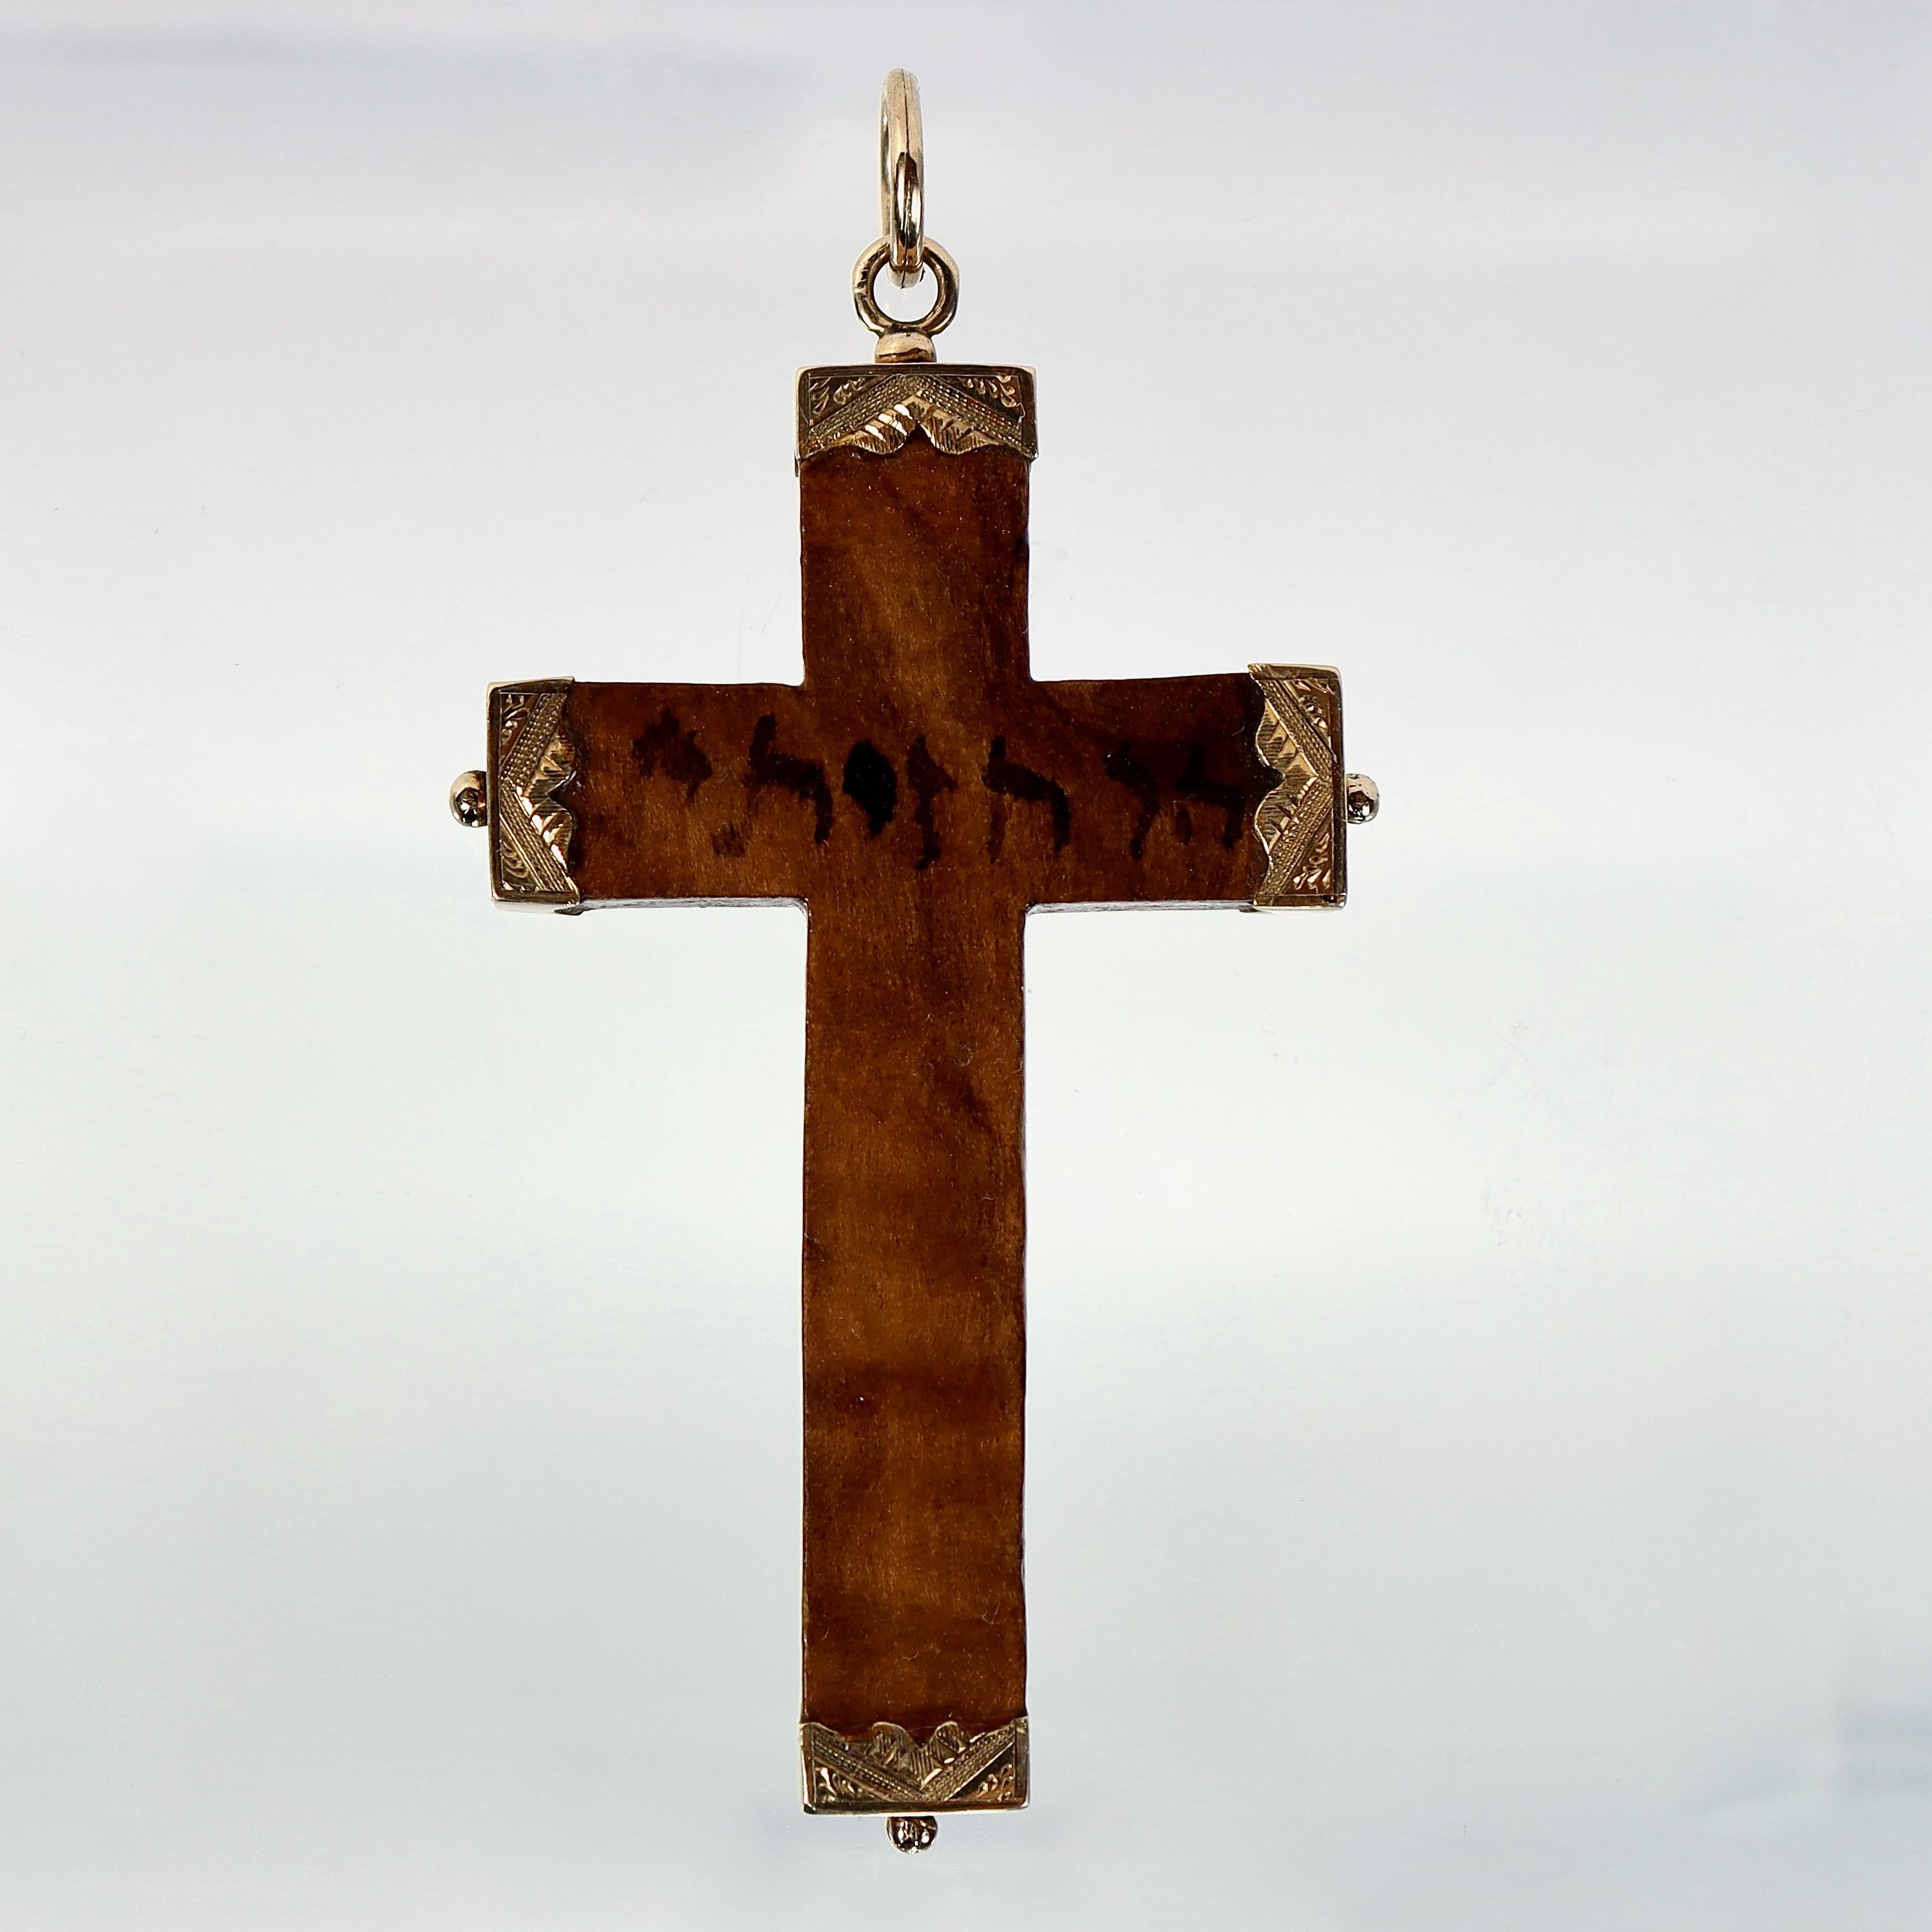 A very fine cross pendant.

A solid olive wood cross with decorative engraved 14k gold caps on ends.

Hebrew/Aramaic writing on center of cross.

Simply a wonderful  pendant cross!

Date:
20th Century

Overall Condition:
It is in overall good,